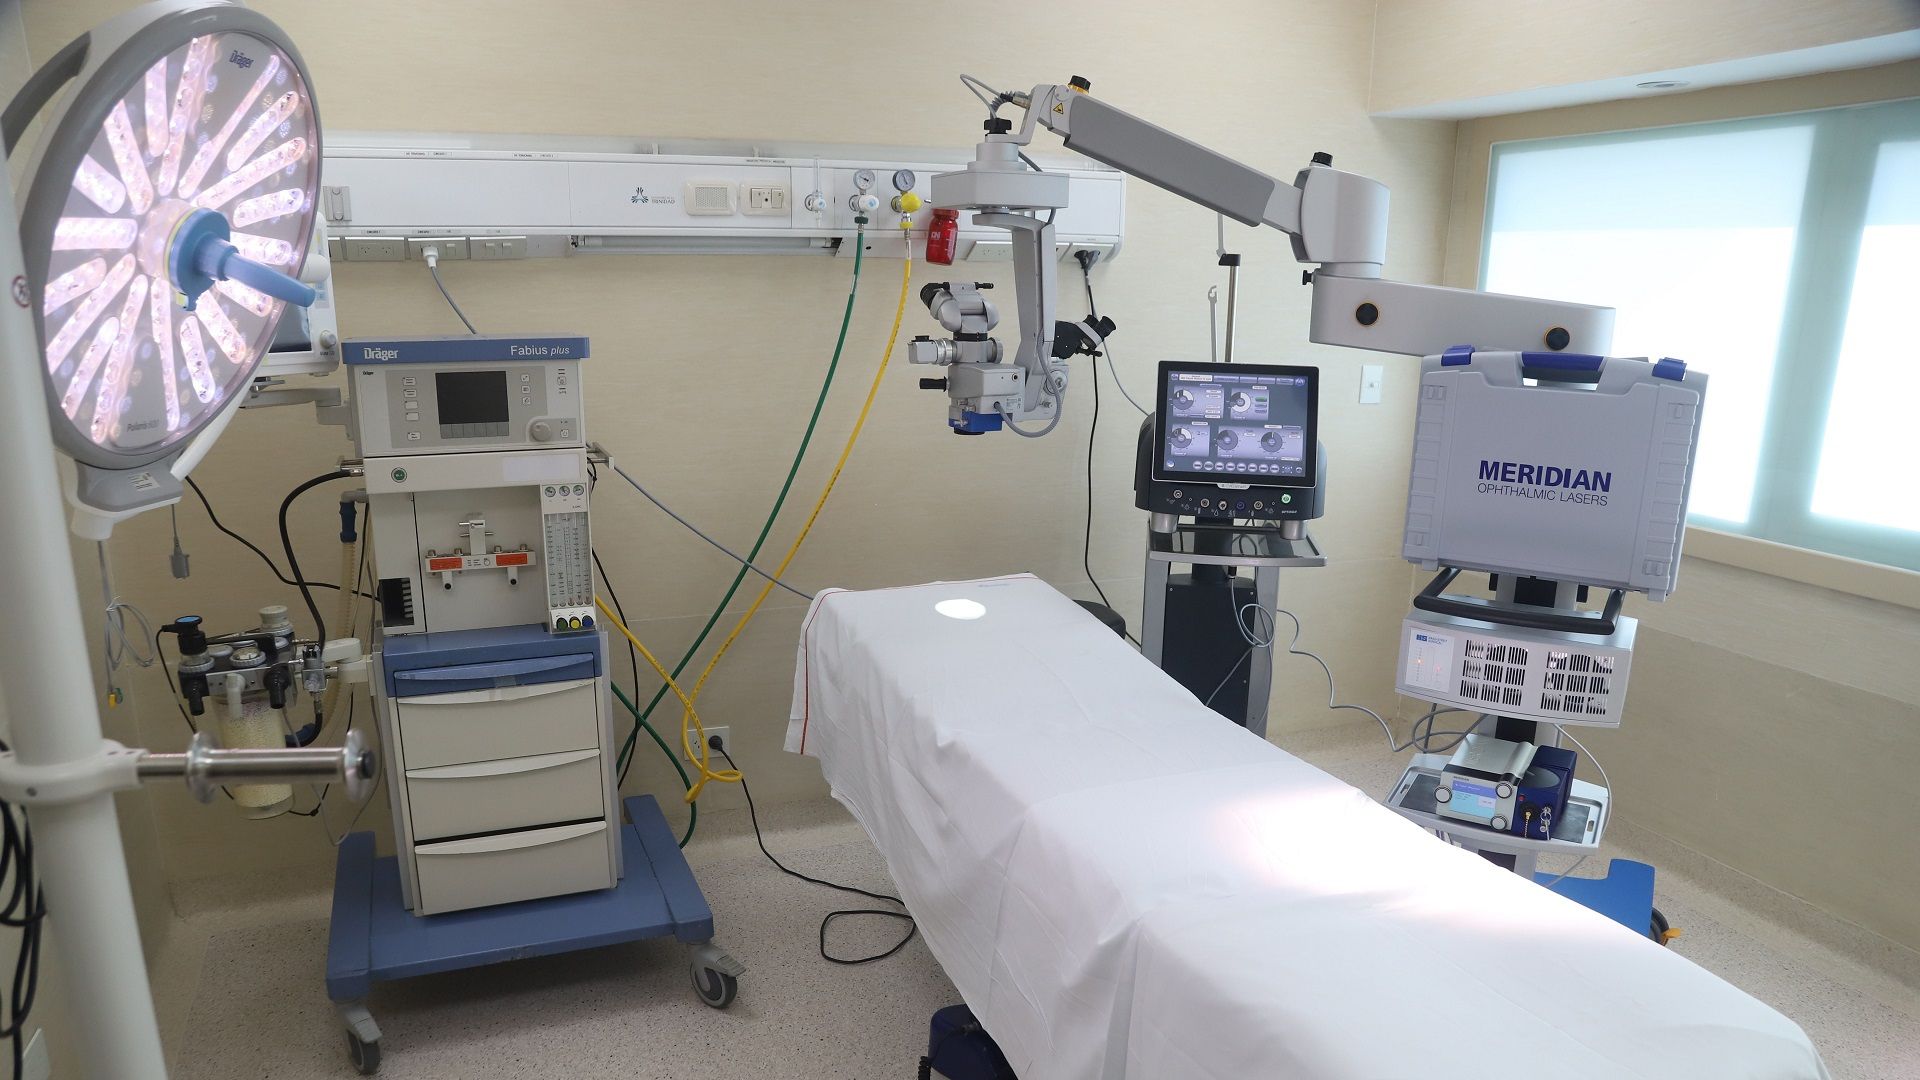 Image copyright Galeno Group Press Mobile and central operating rooms will allow for a wide range of surgical interventions